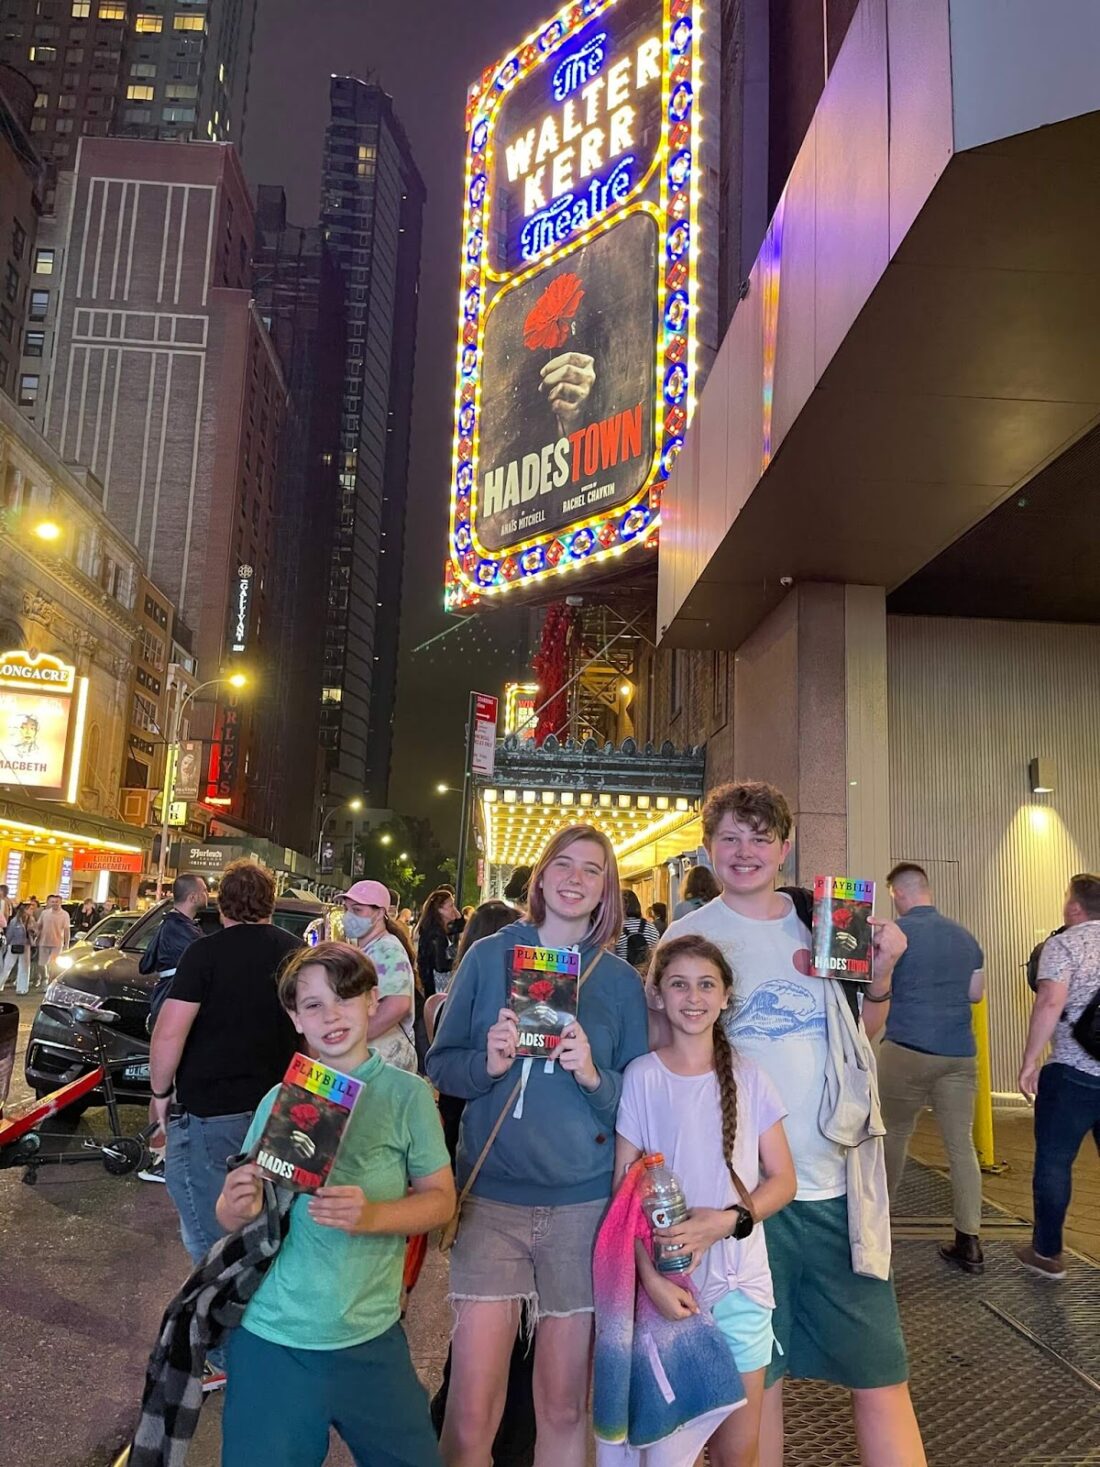 Best-Broadway-Shows-in-New-York-City-with-Kids-Hadestown-